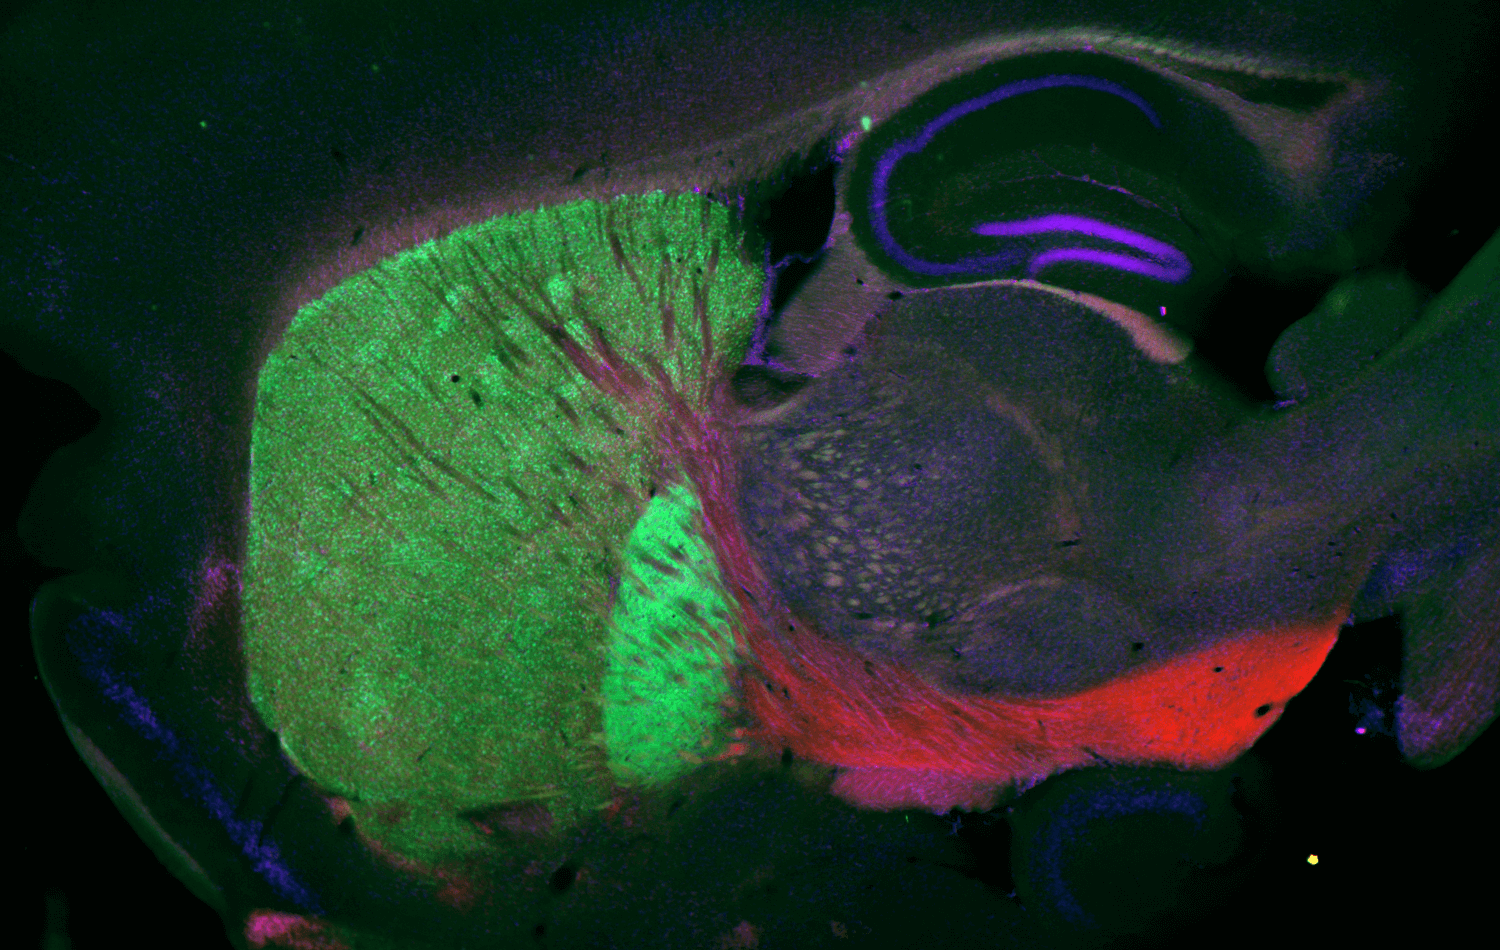 Sagittal view of a mouse brain showing various components